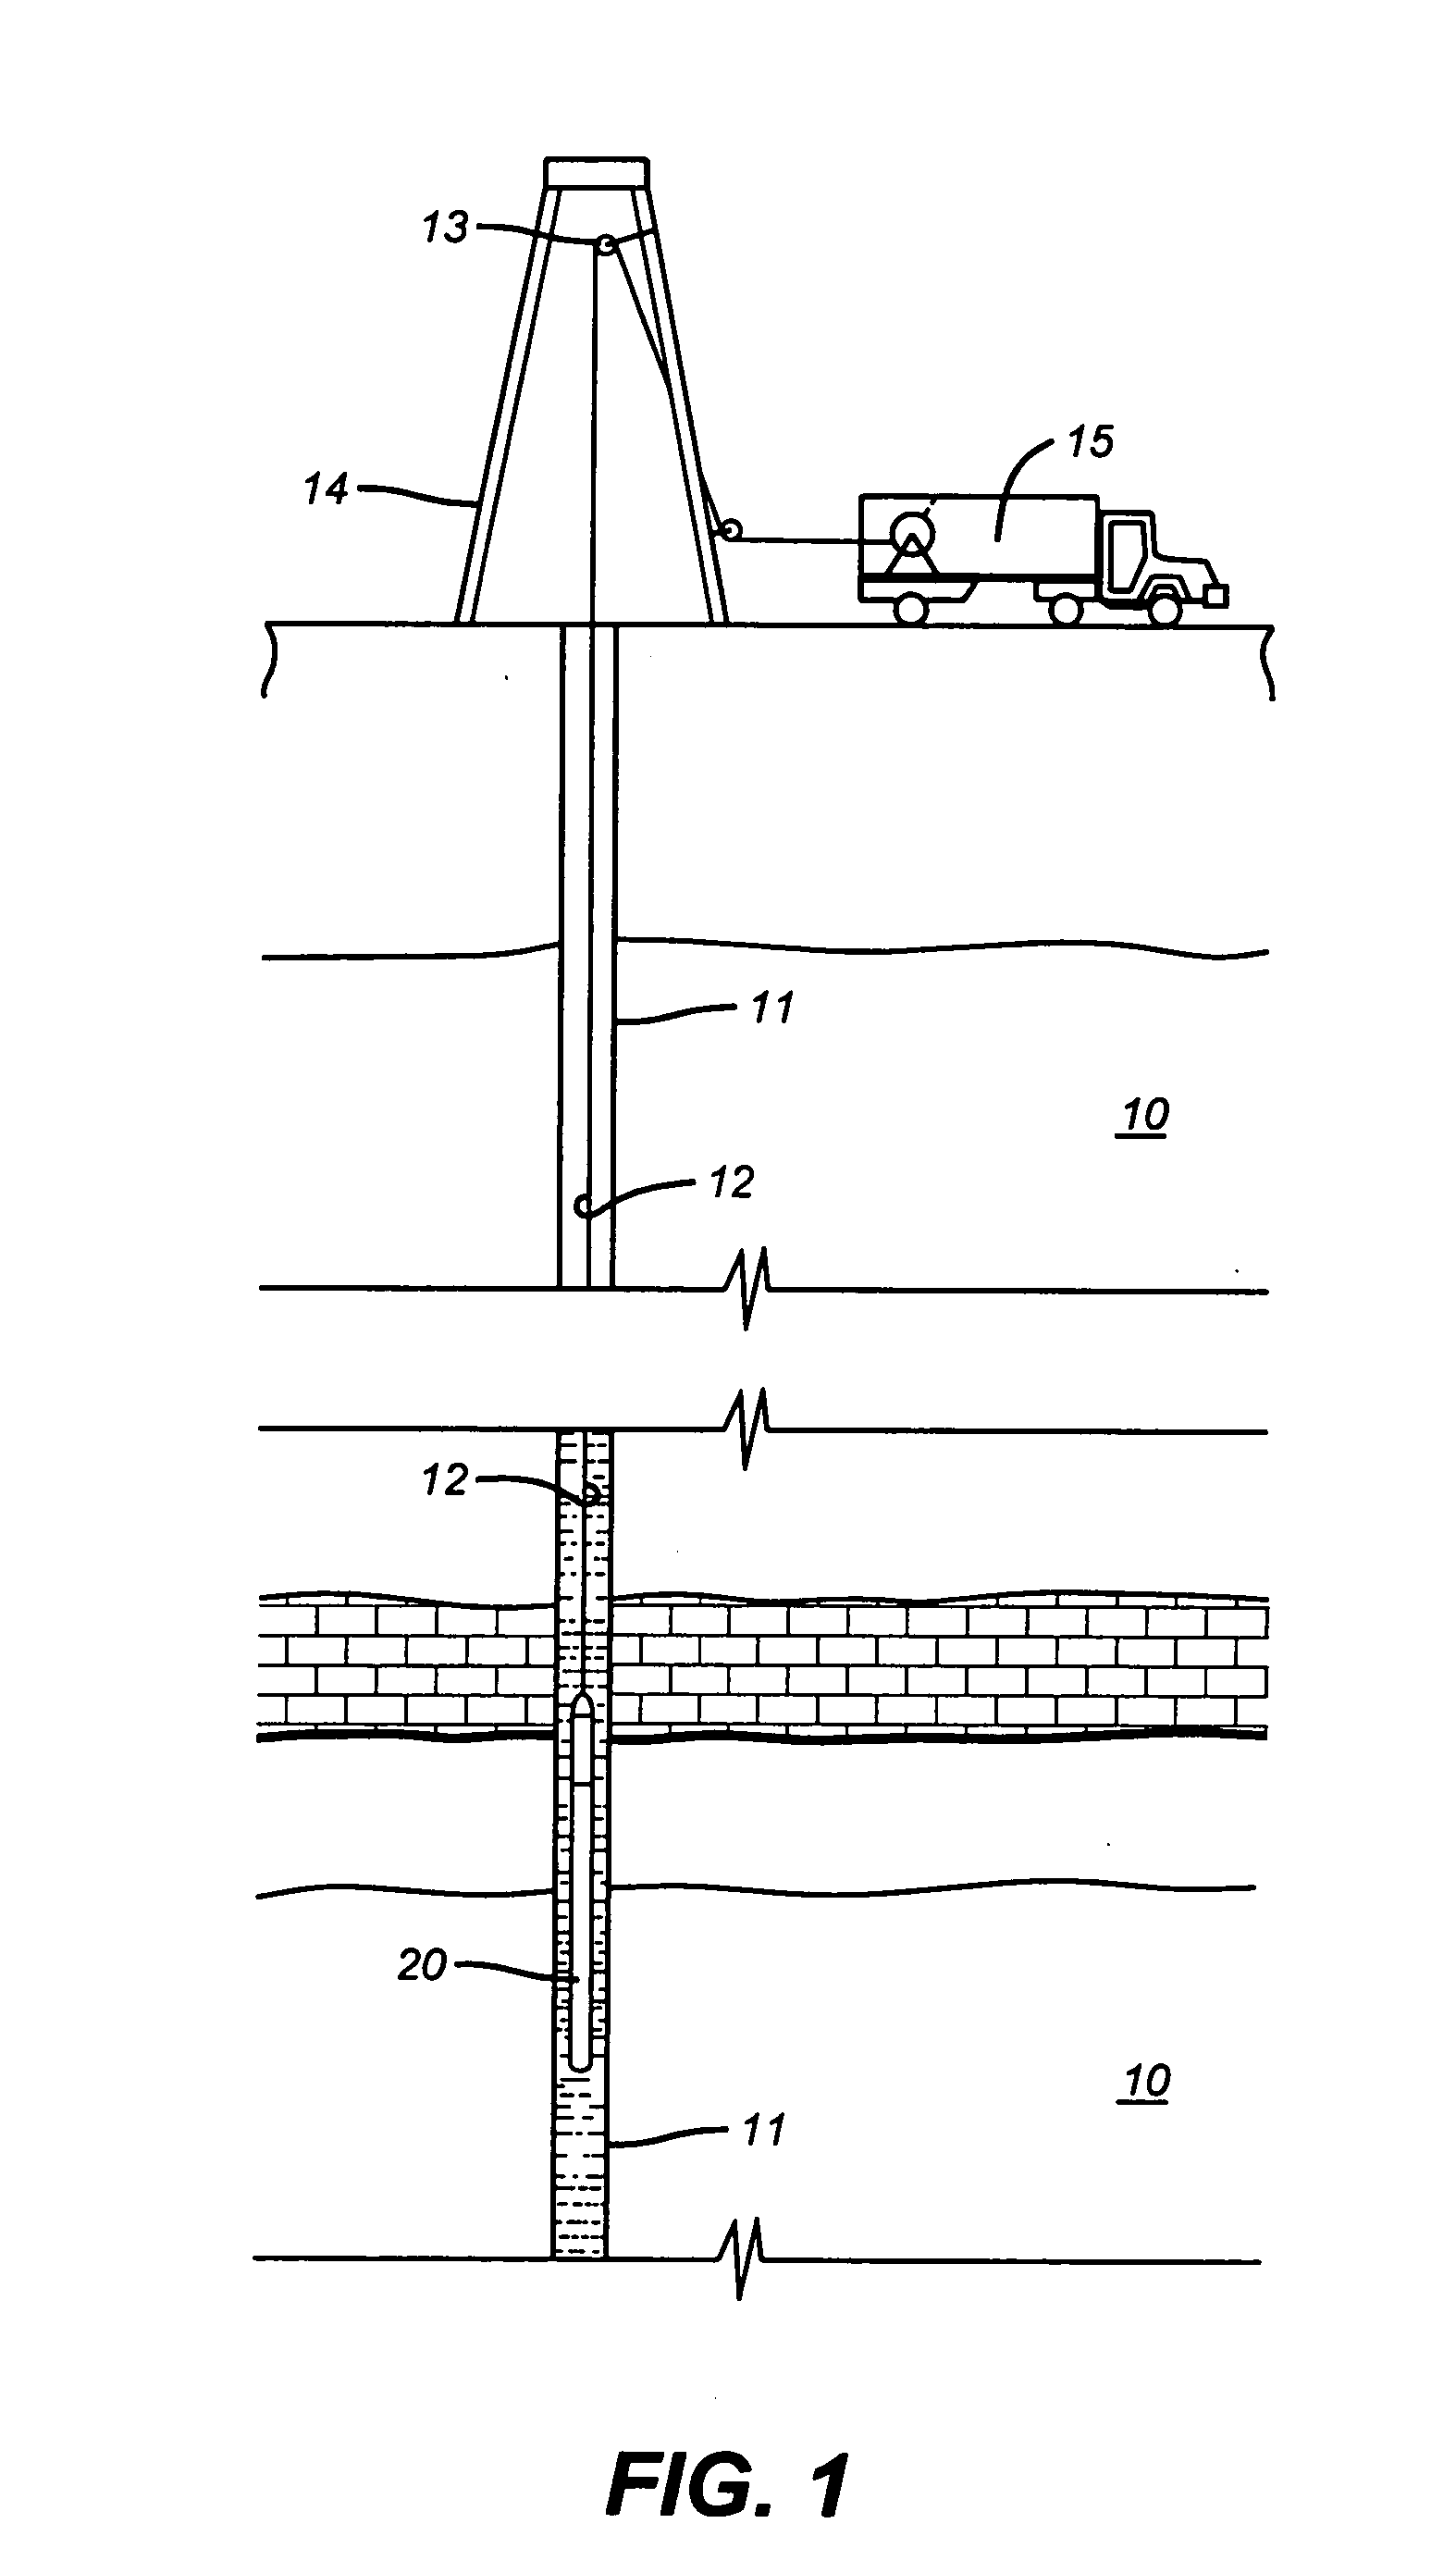 Method and apparatus for an advanced optical analyzer